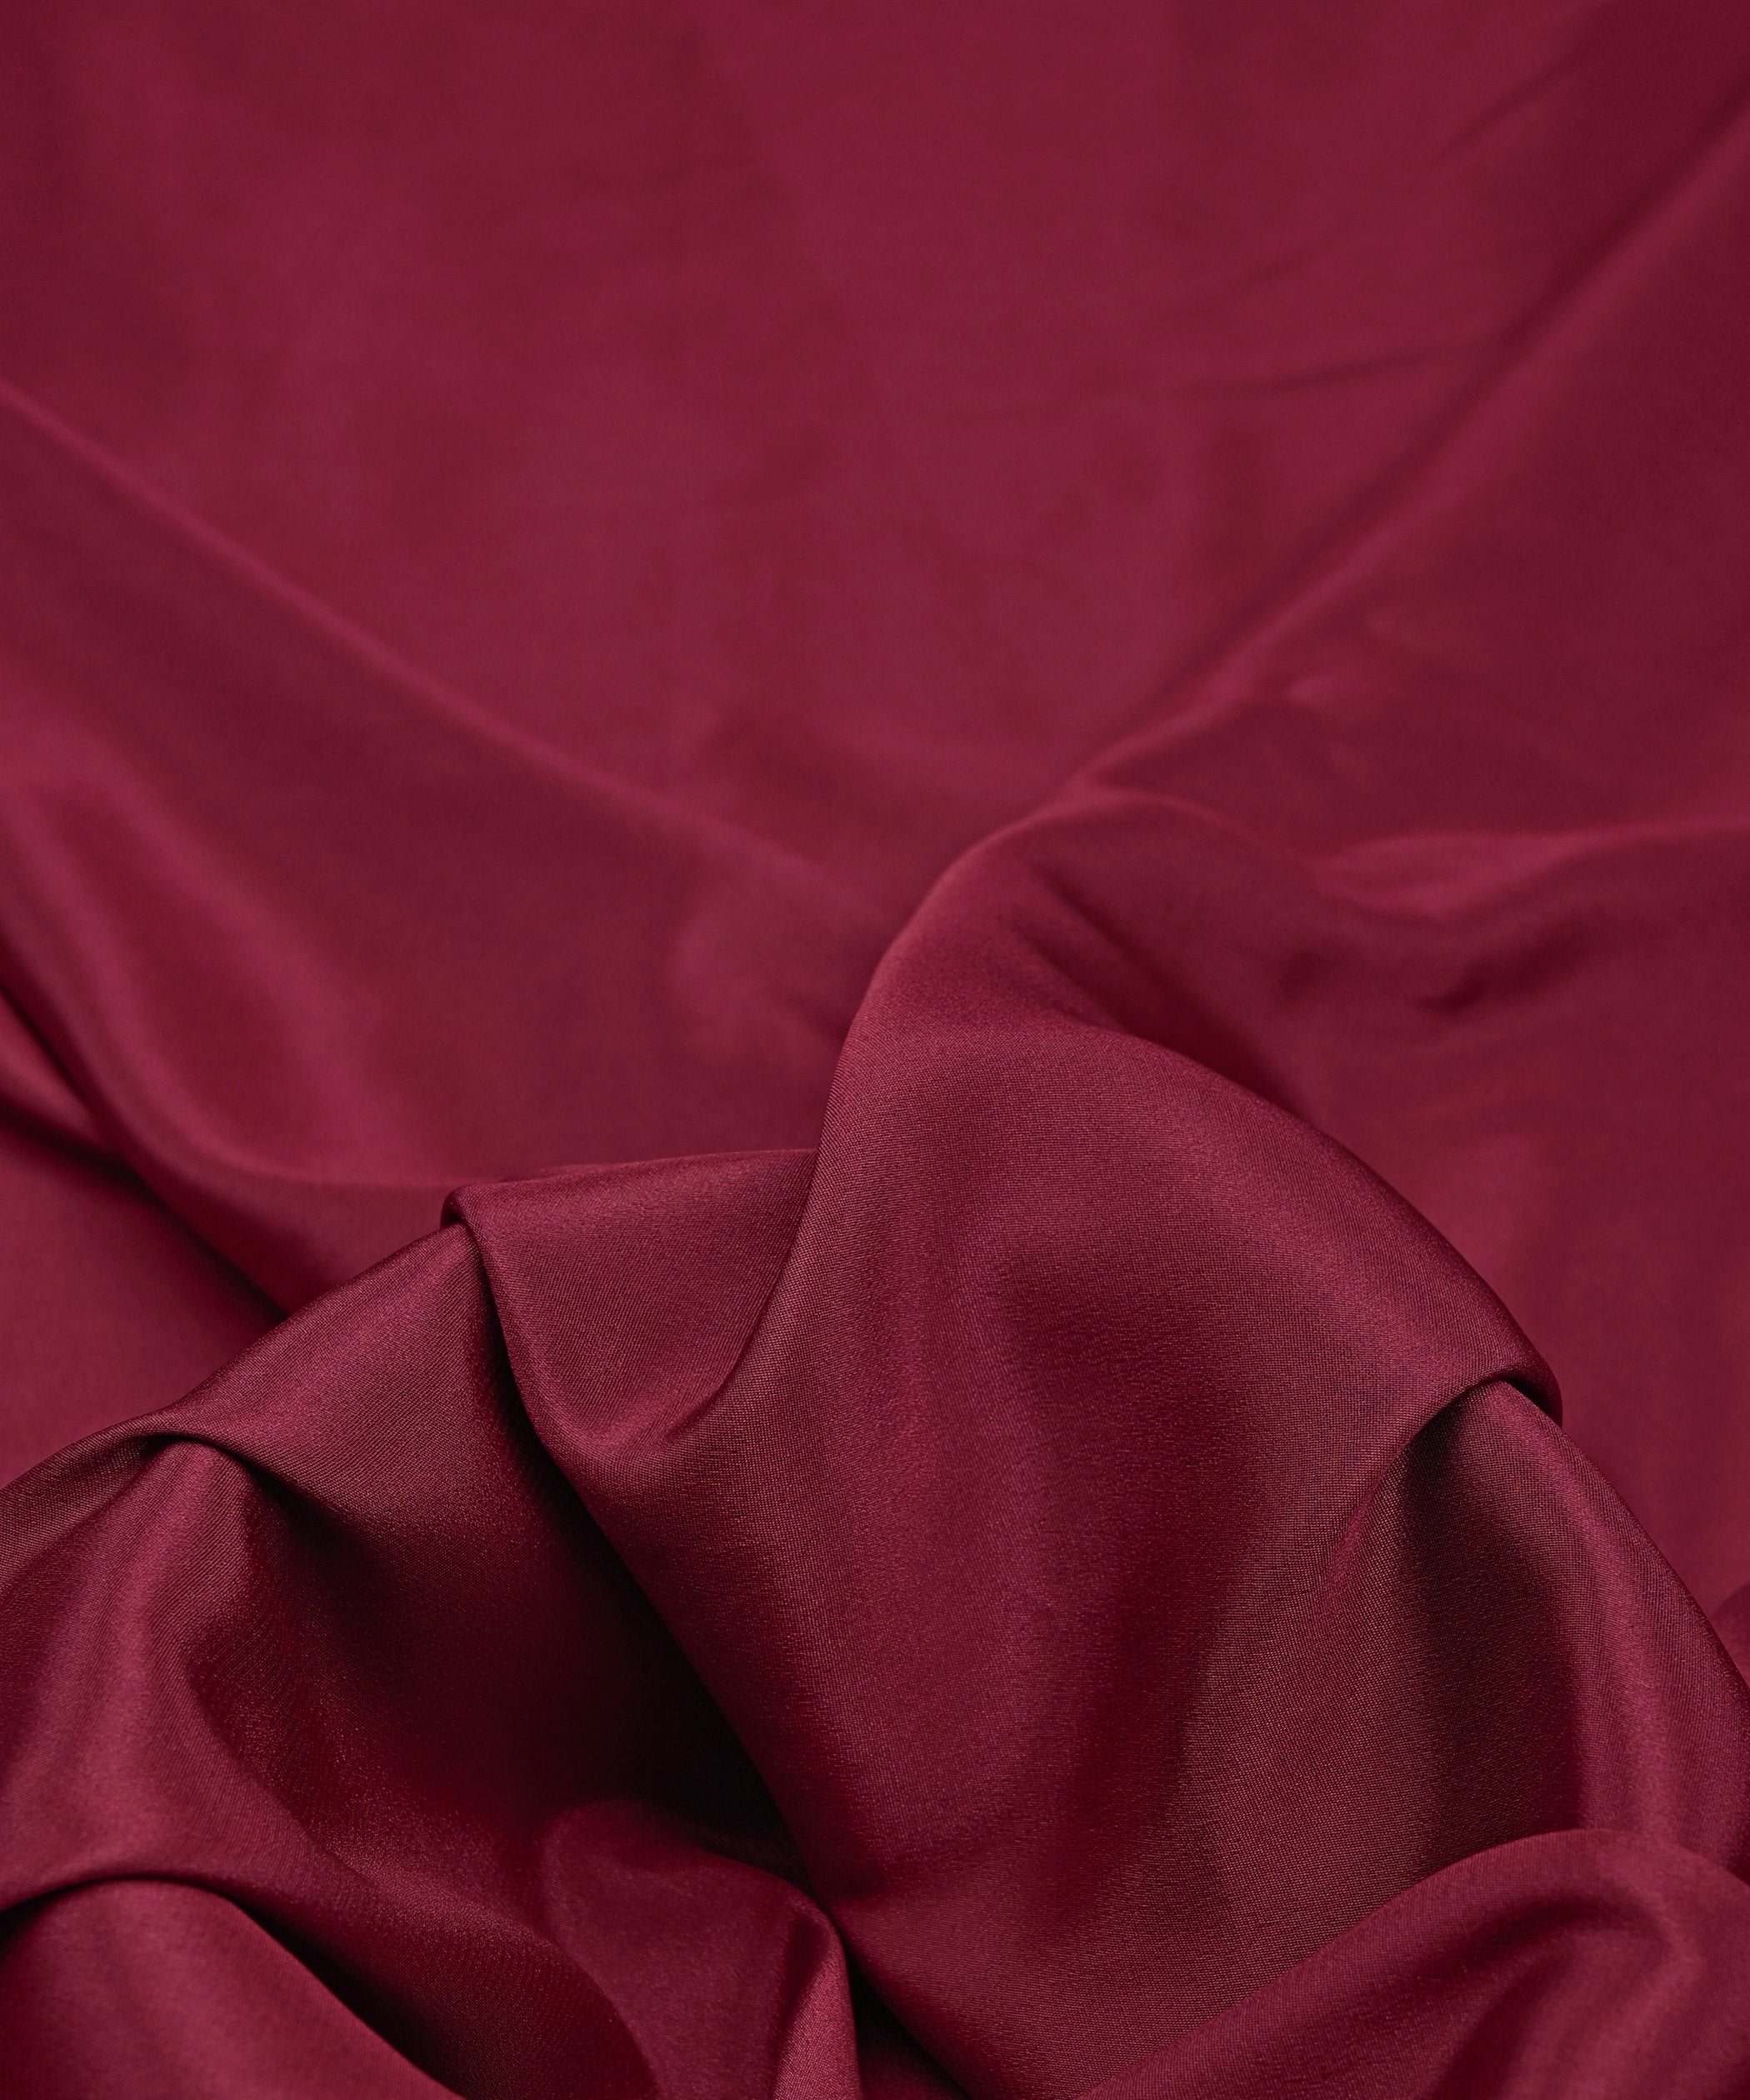 Buy Maroon Plain Crepe Fabric Online At Wholesale Prices – Fabric Depot